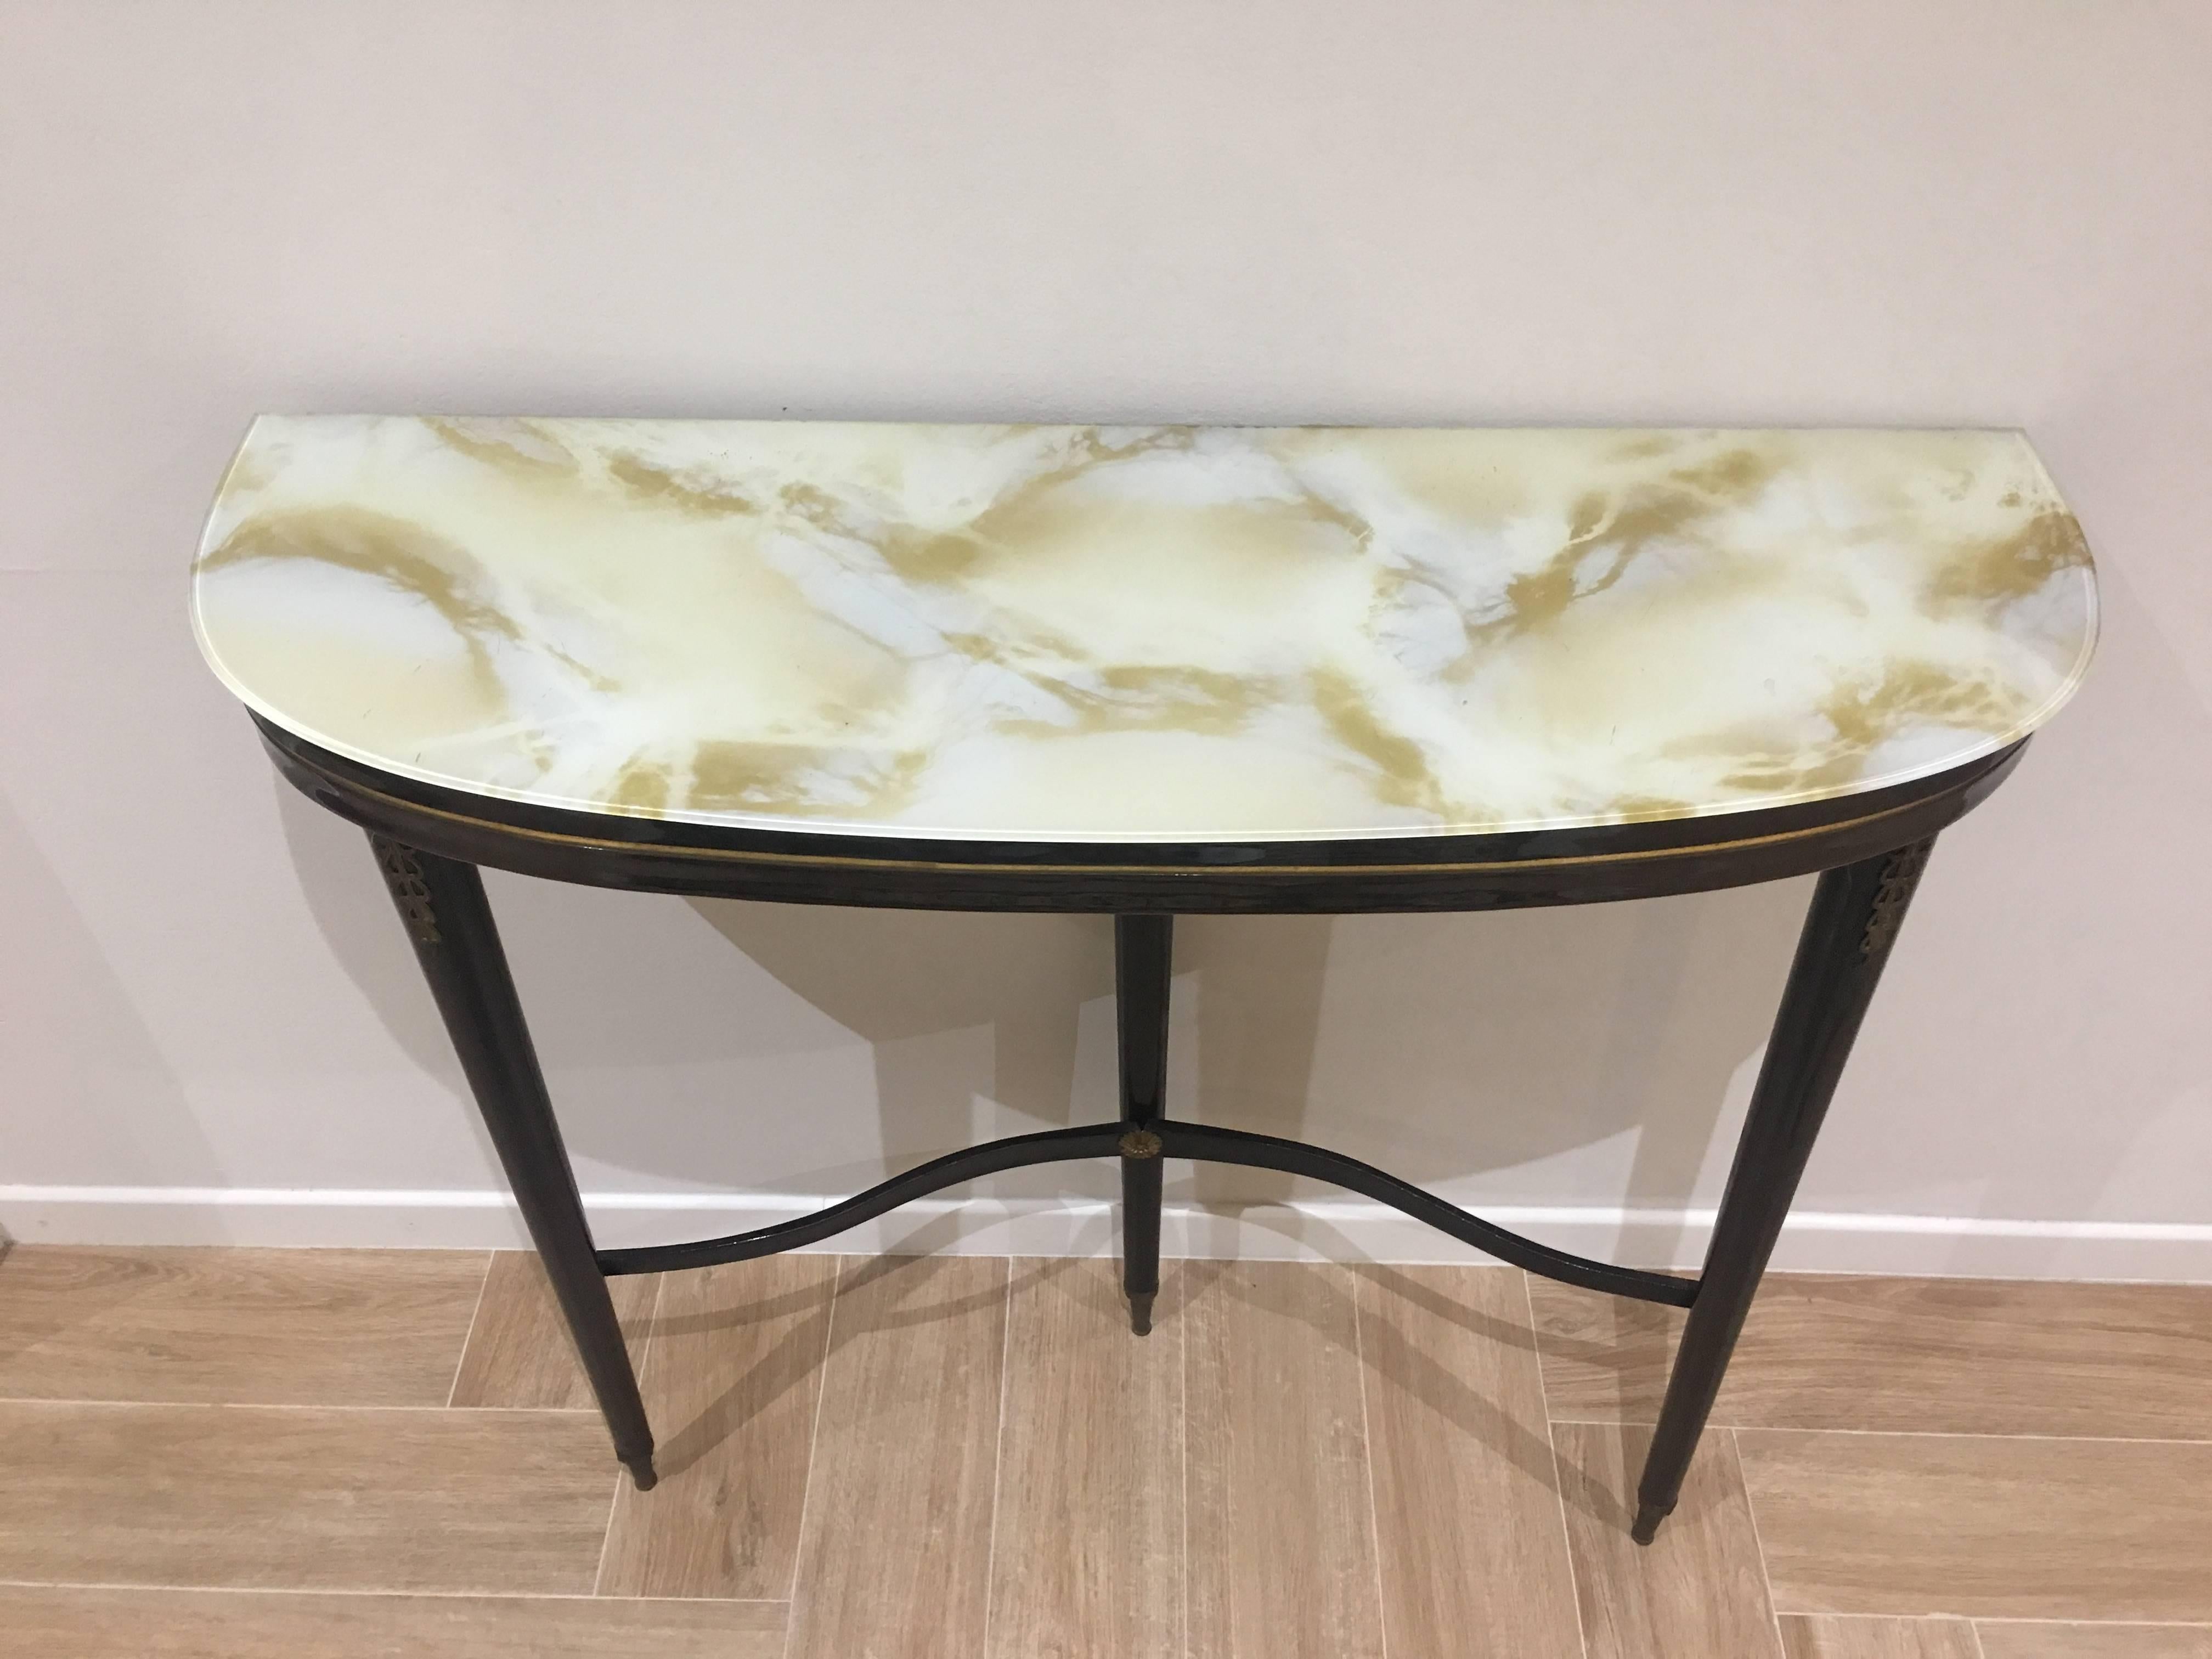 Art Deco Italian Demilune Black Wooden Console Table with a Glass Top